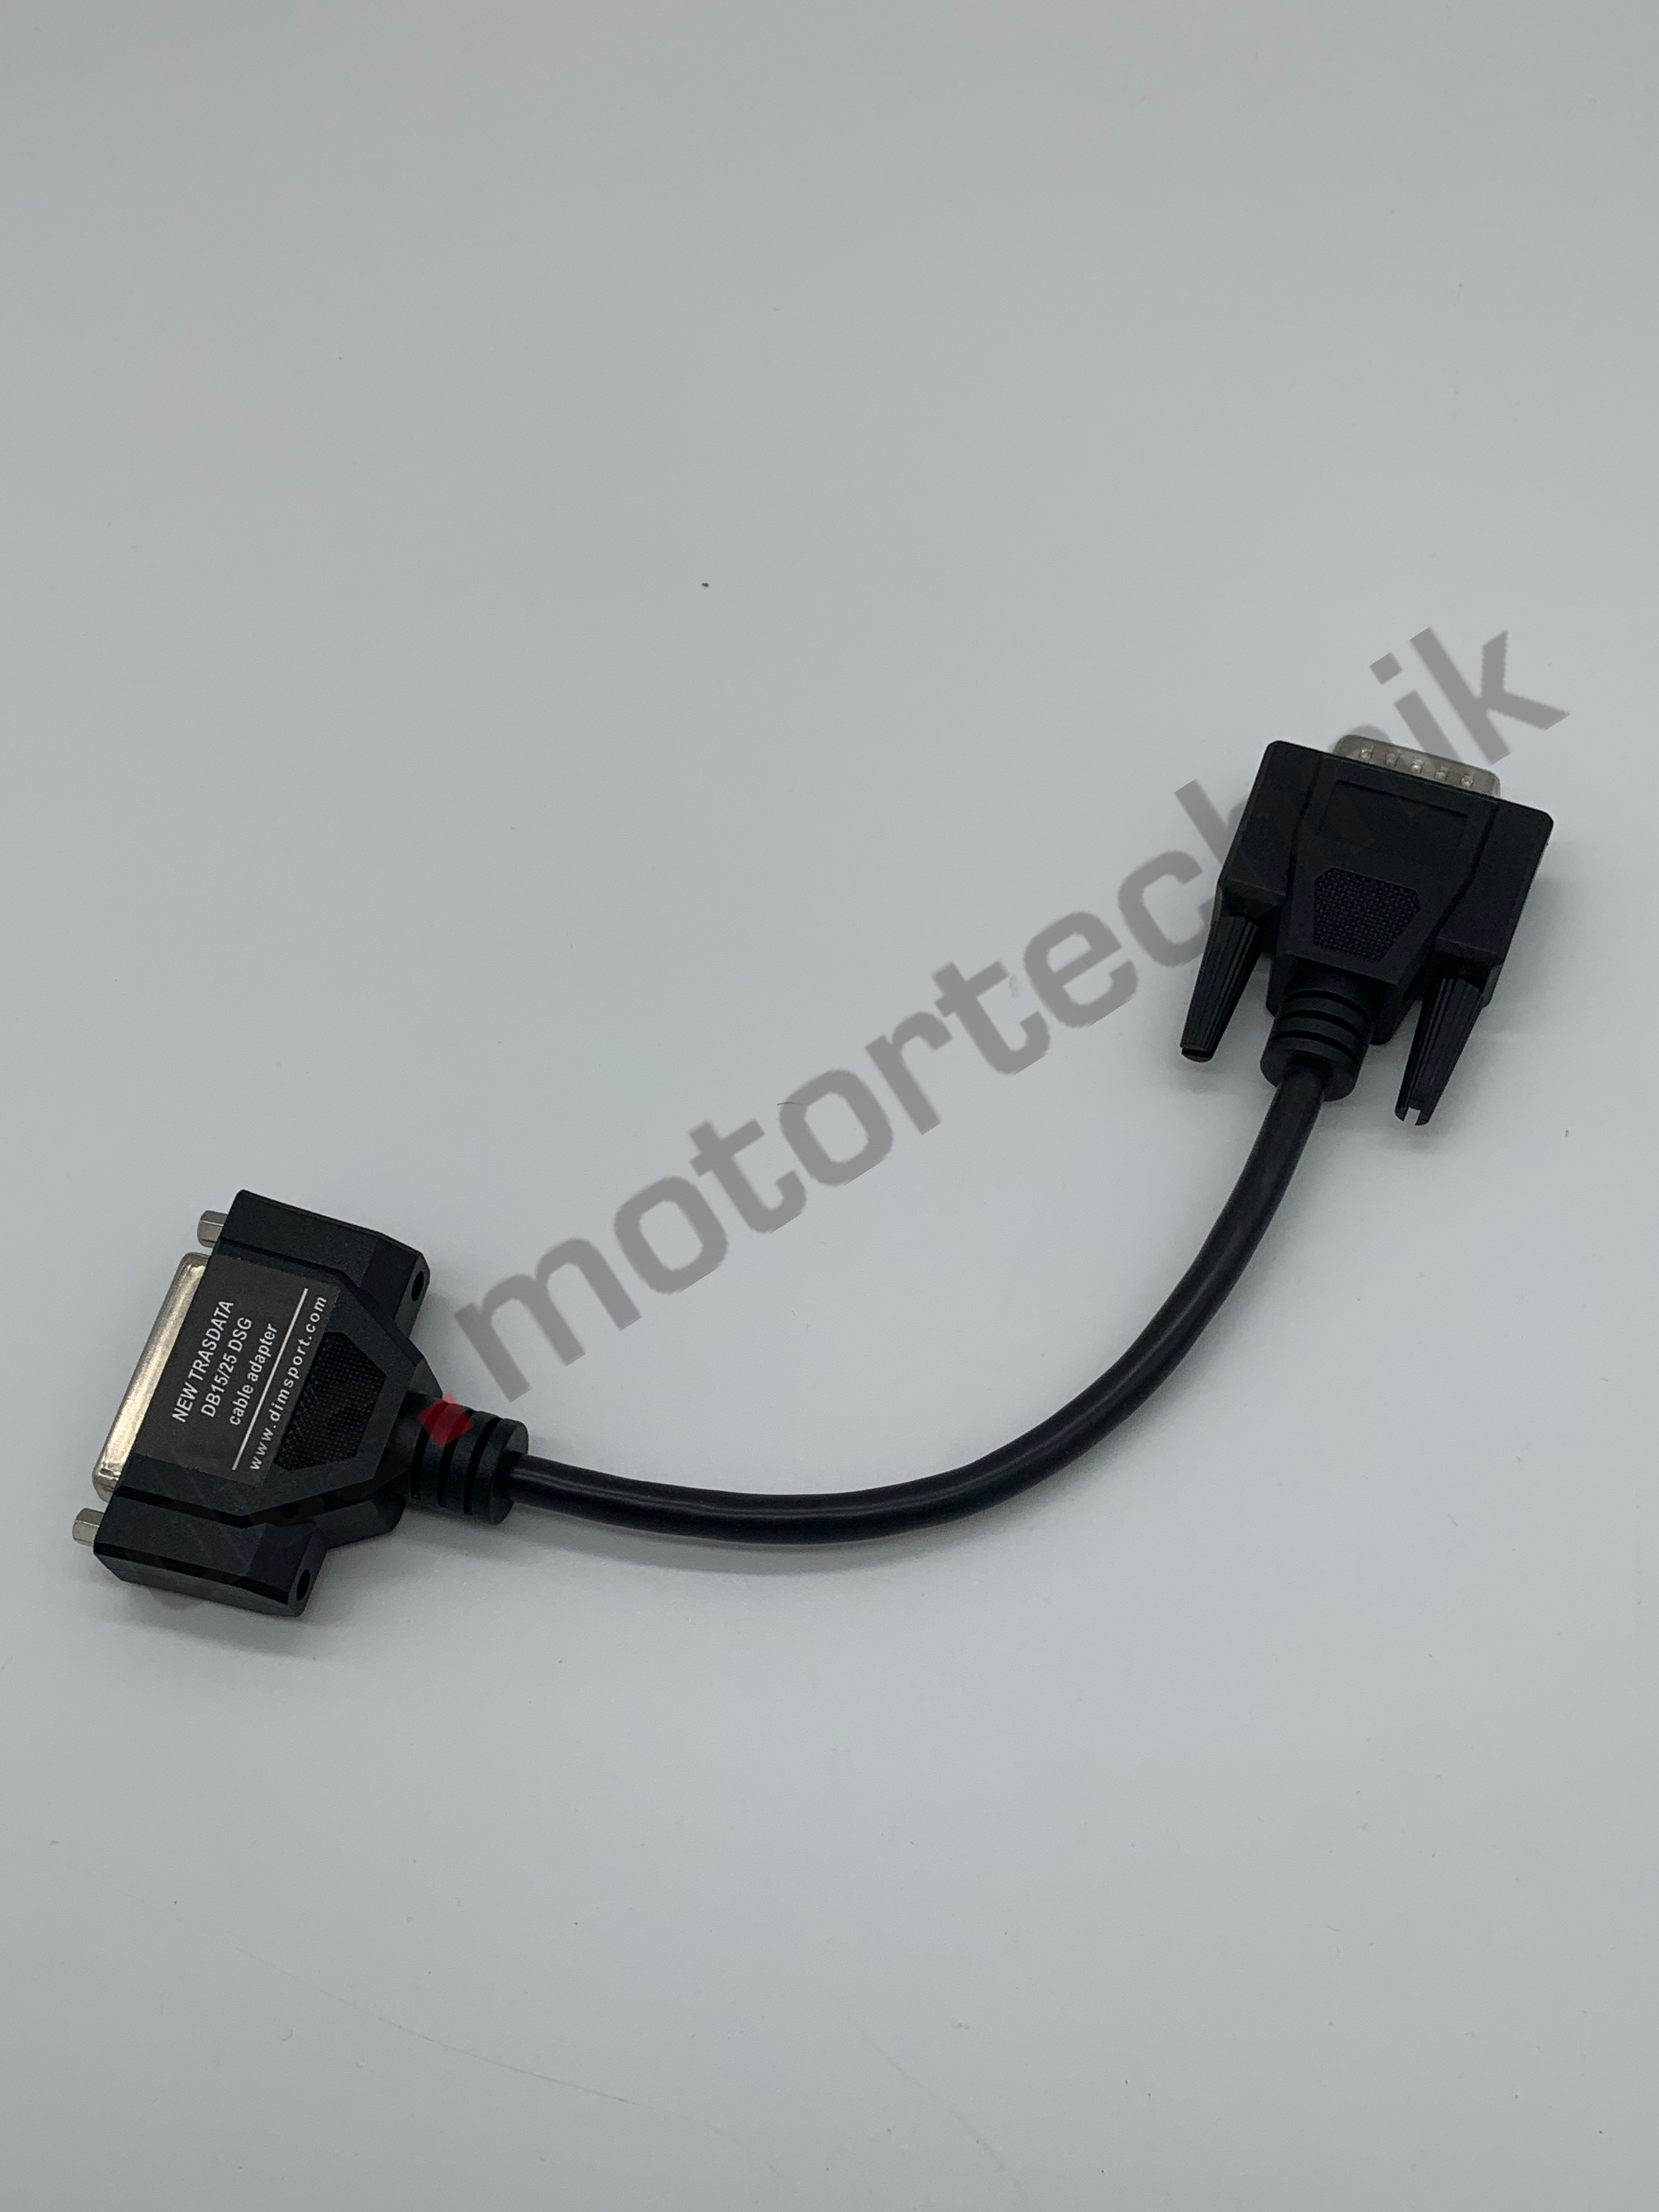 F34NTA24 - Adapter from Trasdata (DB15) to Genius (DB25) for DSG VL381 cable (F32GN085)